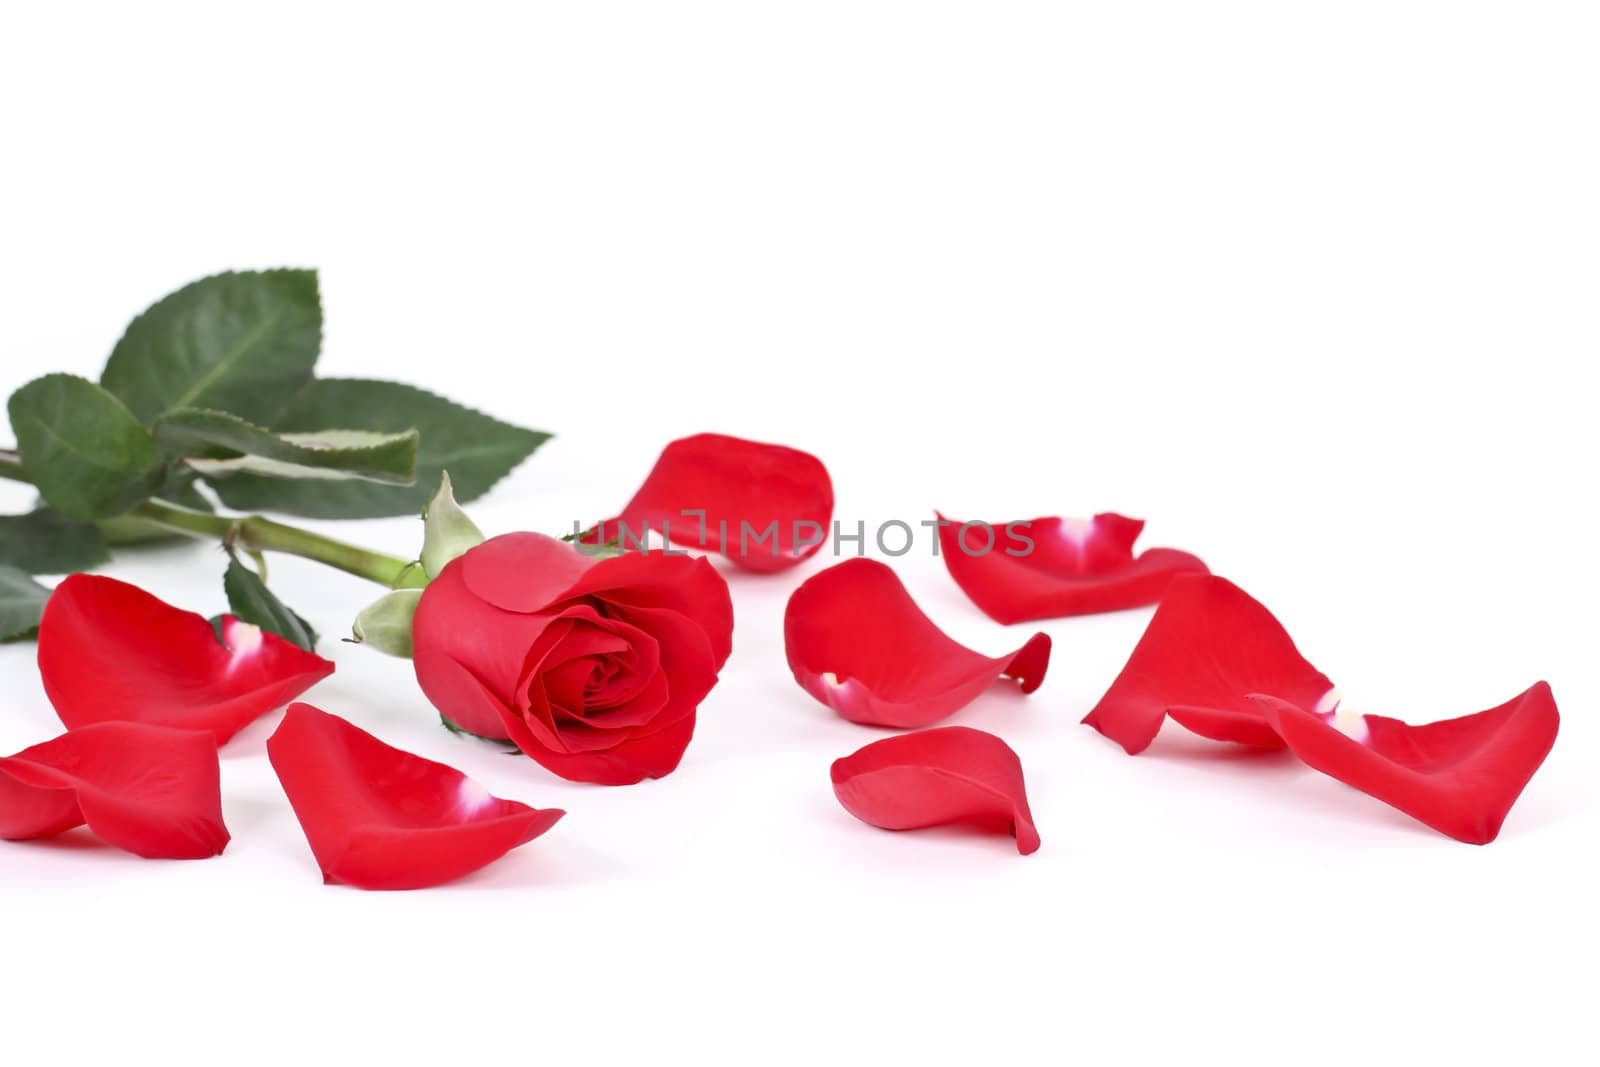 Red fresh rose and petals on white background